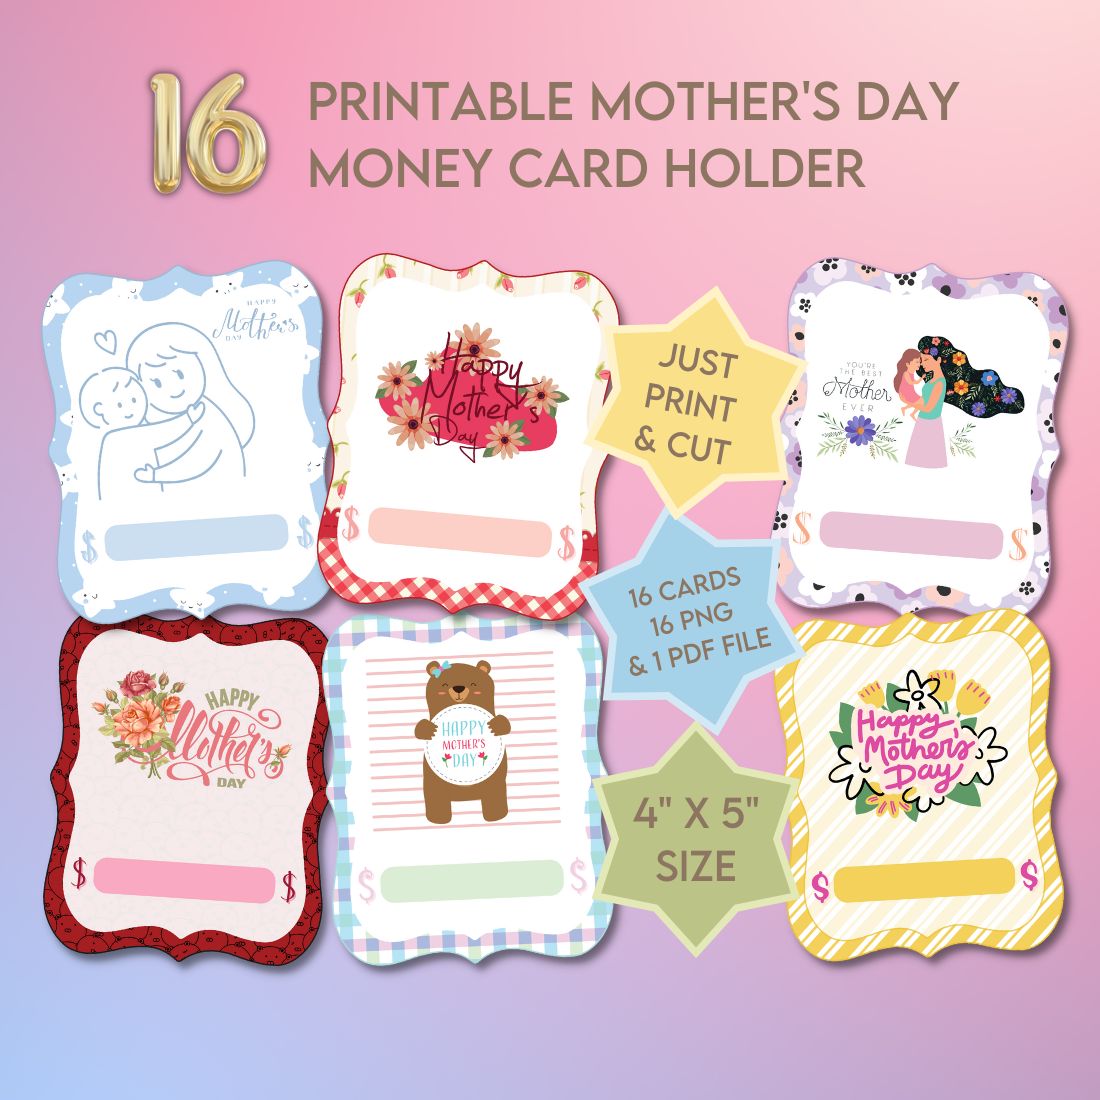 16 Printable Mother's Day Money Card Holder preview image.